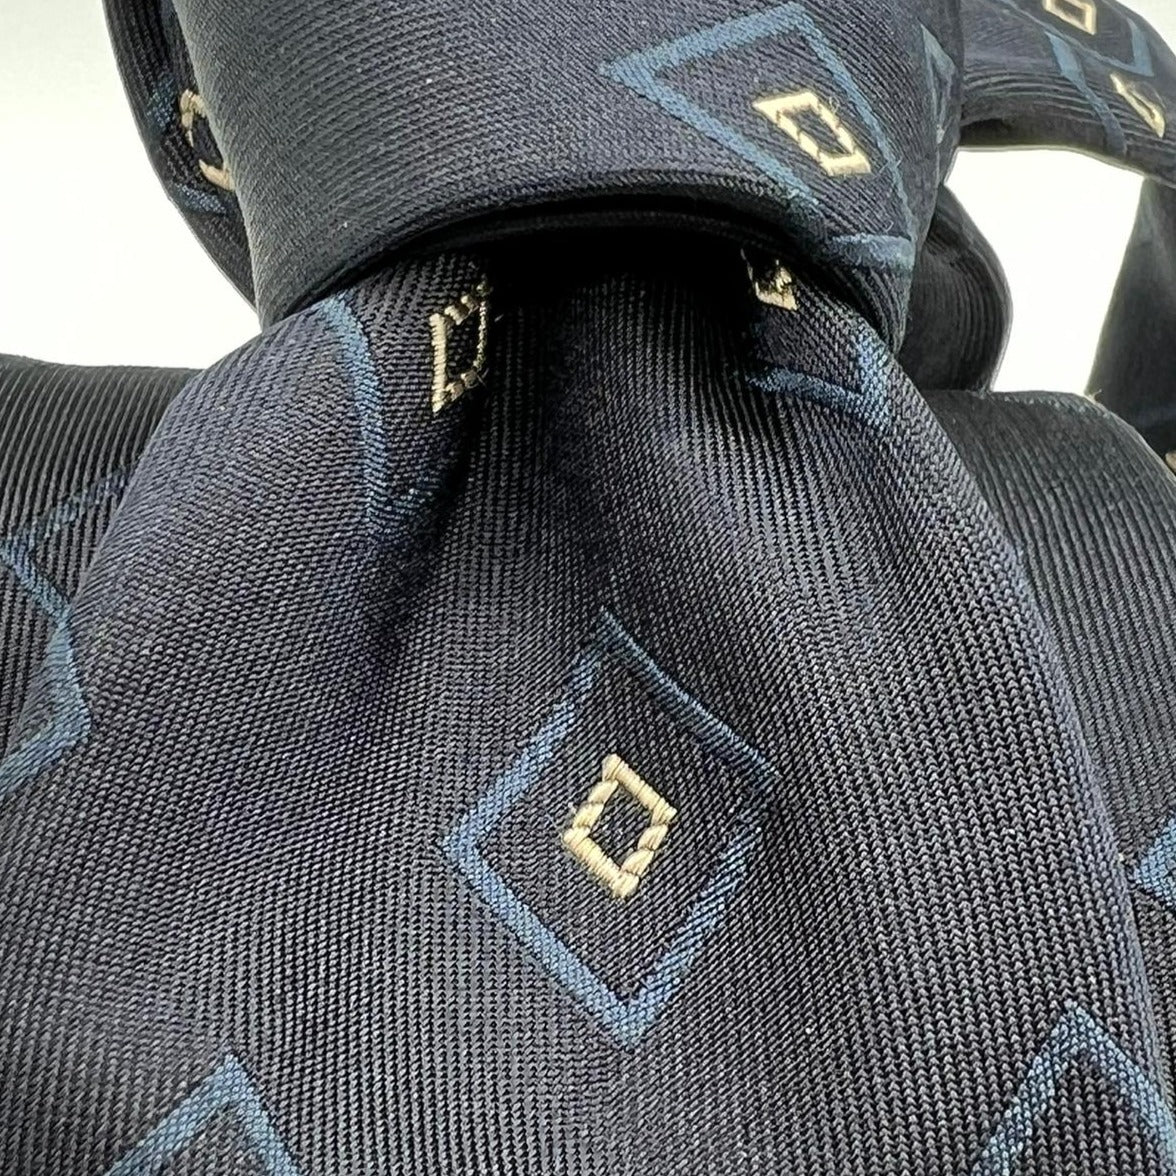 Cruciani & Bella 100% Silk  Self Tipped Dark  Blue Tie Light Blue and Beige Square Handmade in Italy  9 cm x 148 cm New Old Stock #6886